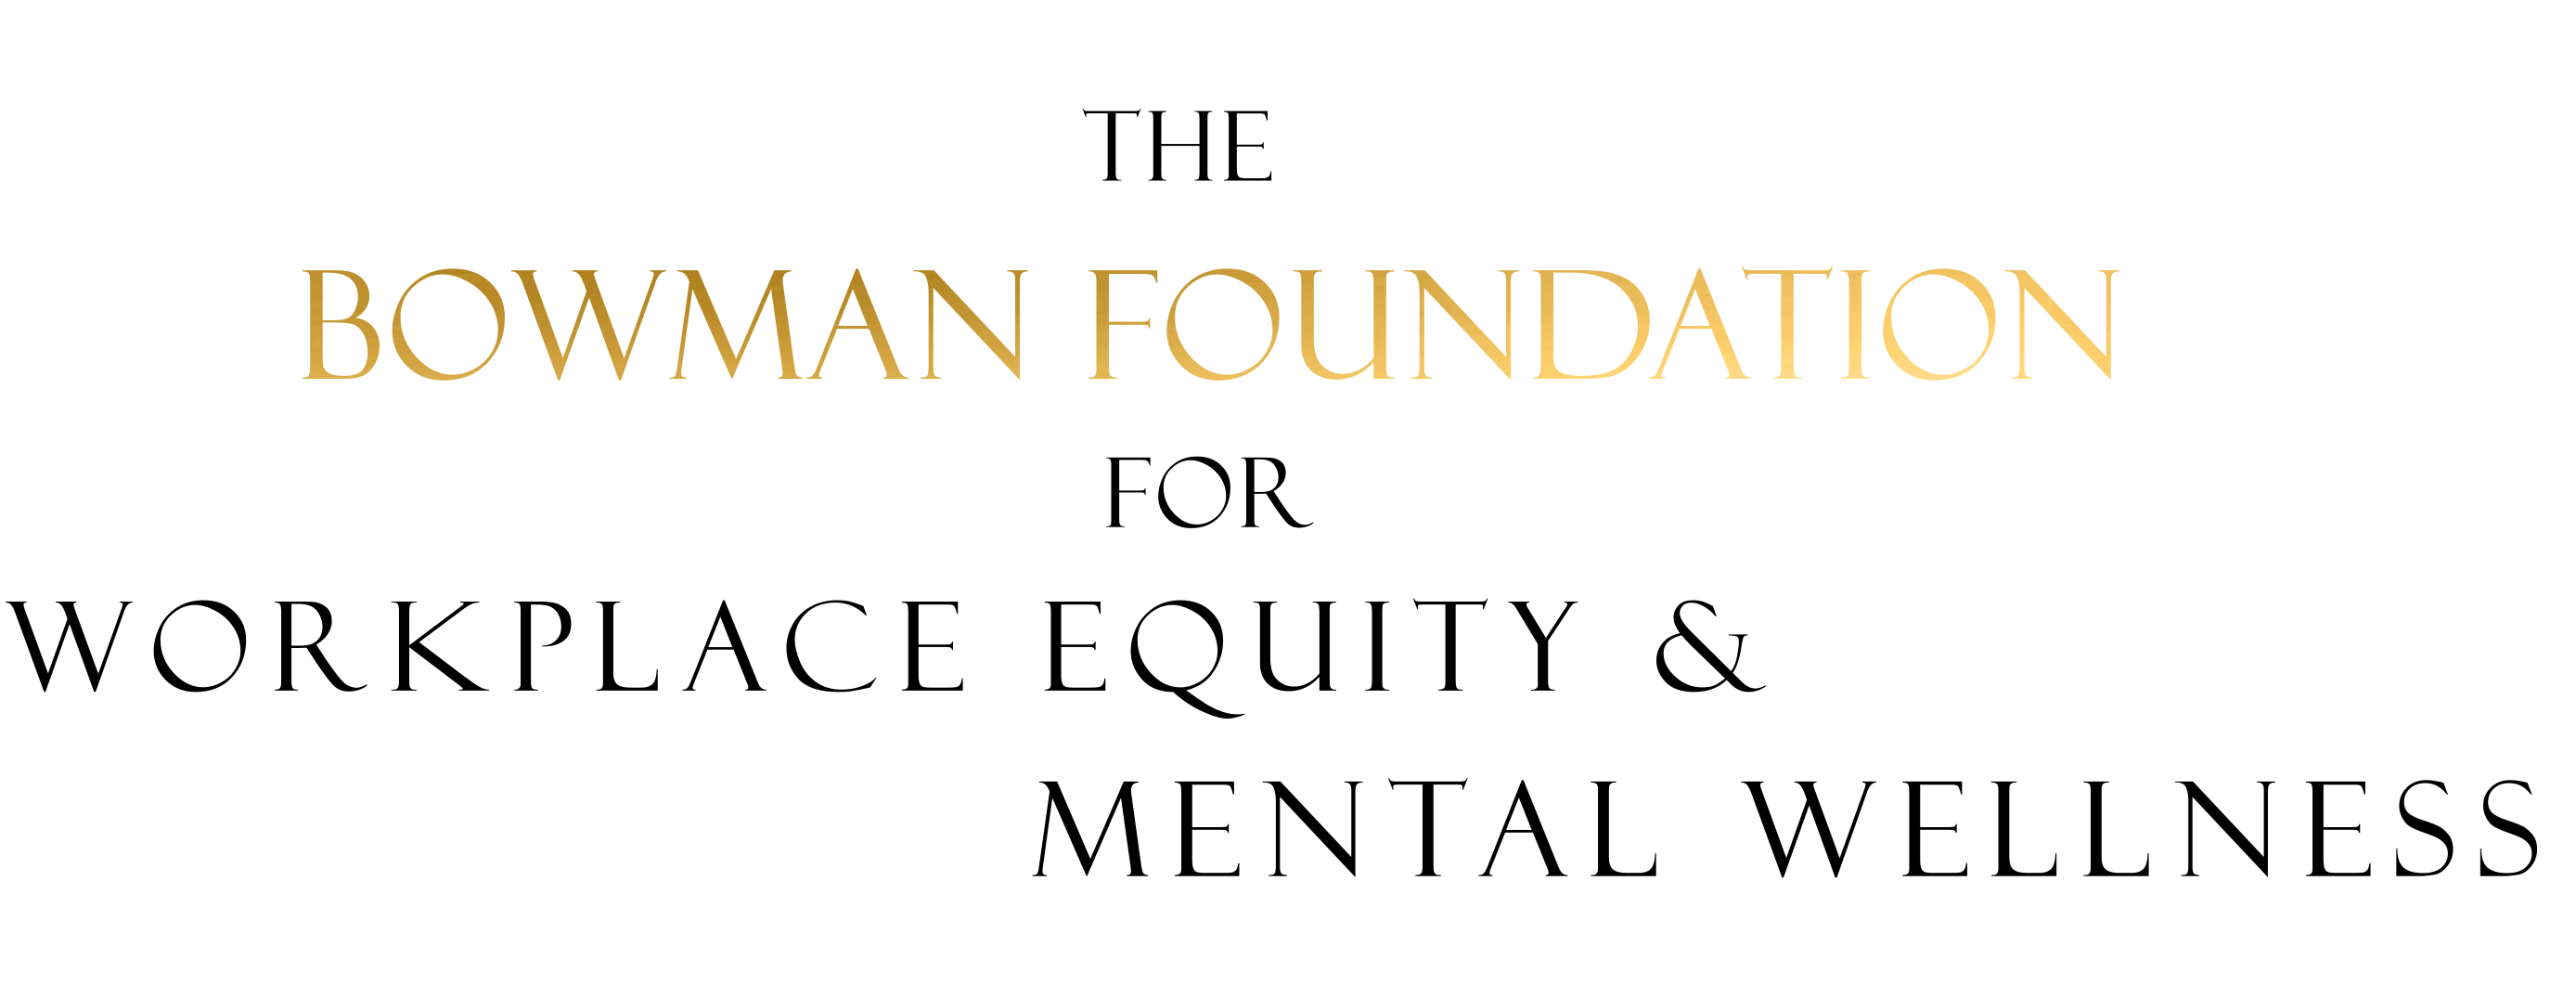 The Bowman Foundation For 